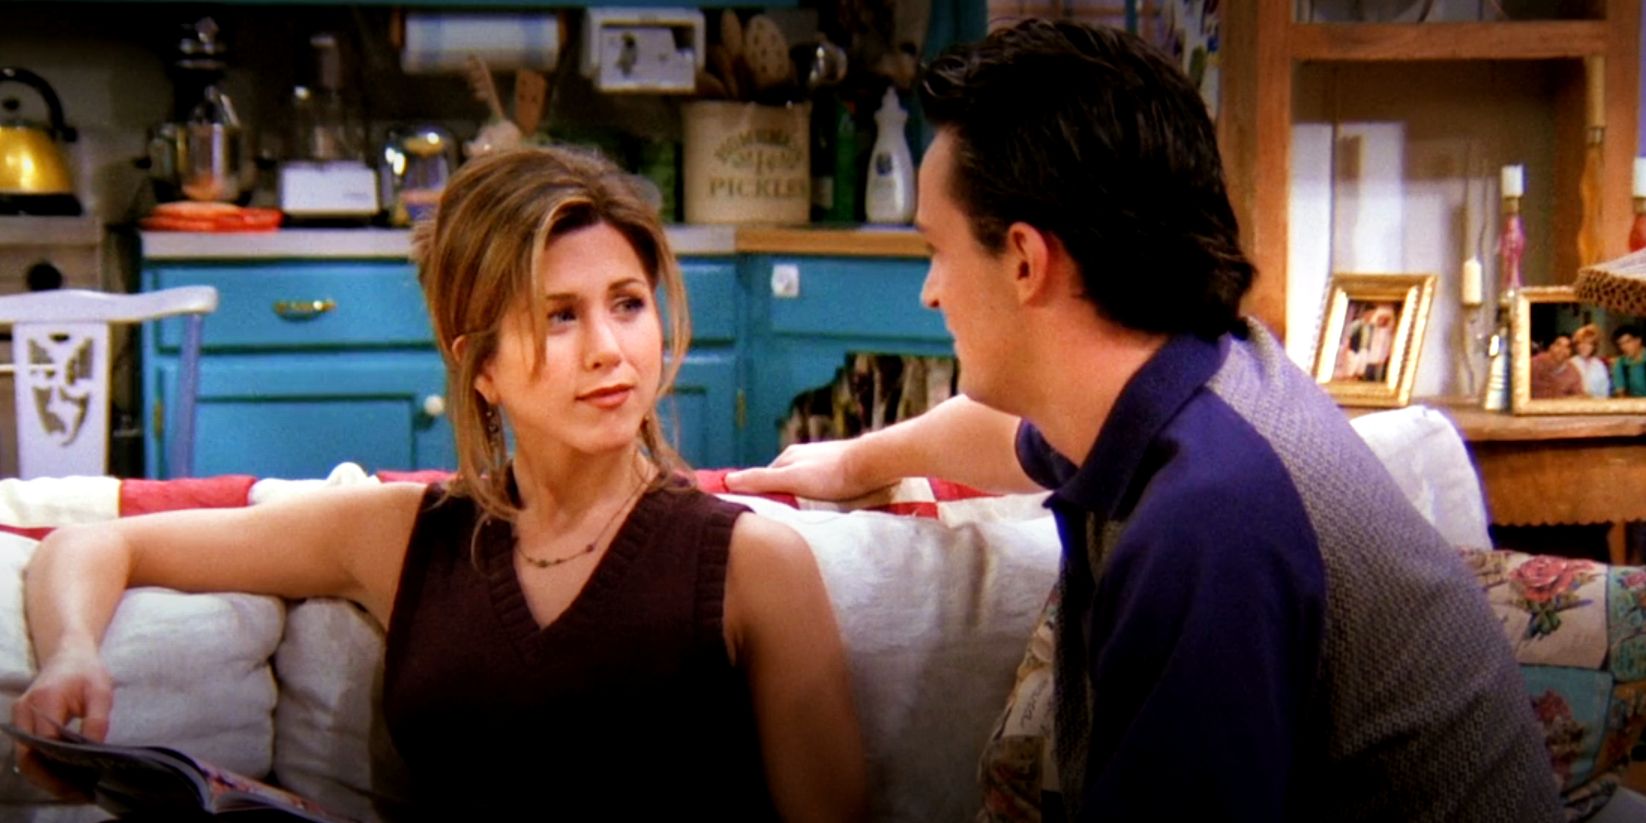 Rachel sitting on the couch talking with Chandler in the Friends season 1 episode 